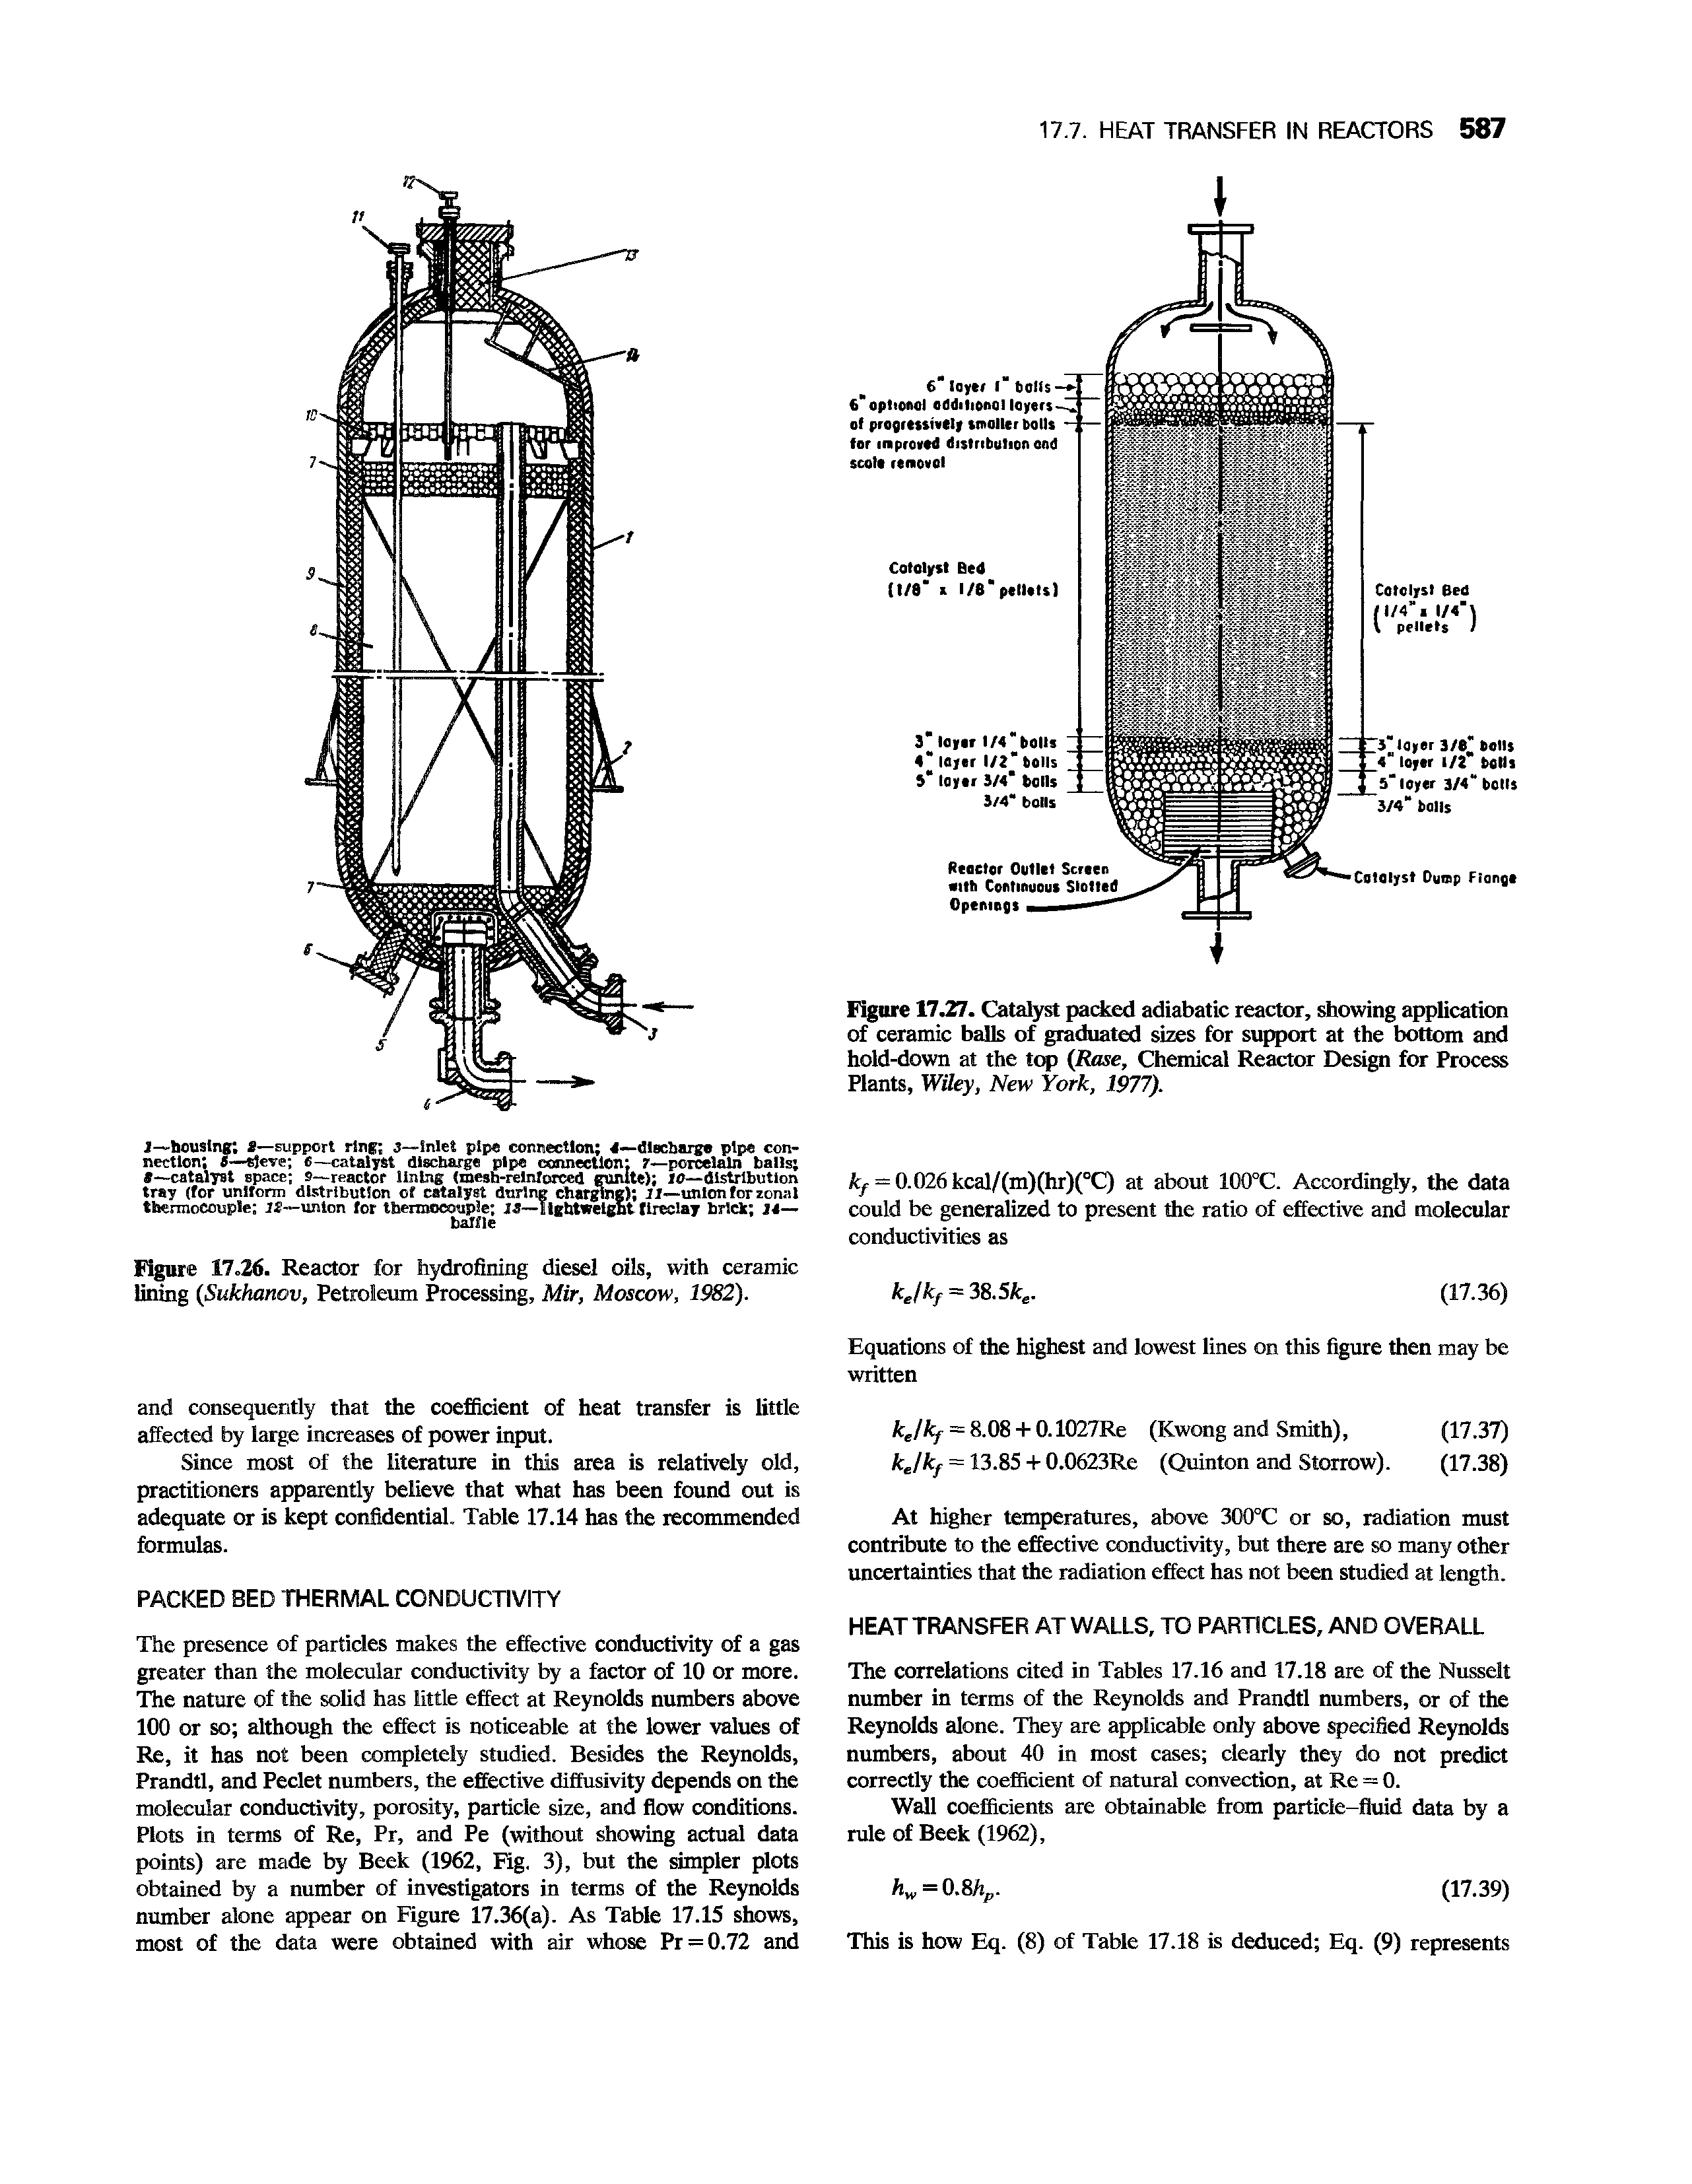 Figure 17.27. Catalyst packed adiabatic reactor, showing application of ceramic balls of graduated sizes for support at the bottom and hold-down at the top Rase, Chemical Reactor Design for Process Plants, Wiley, New York, 1977).